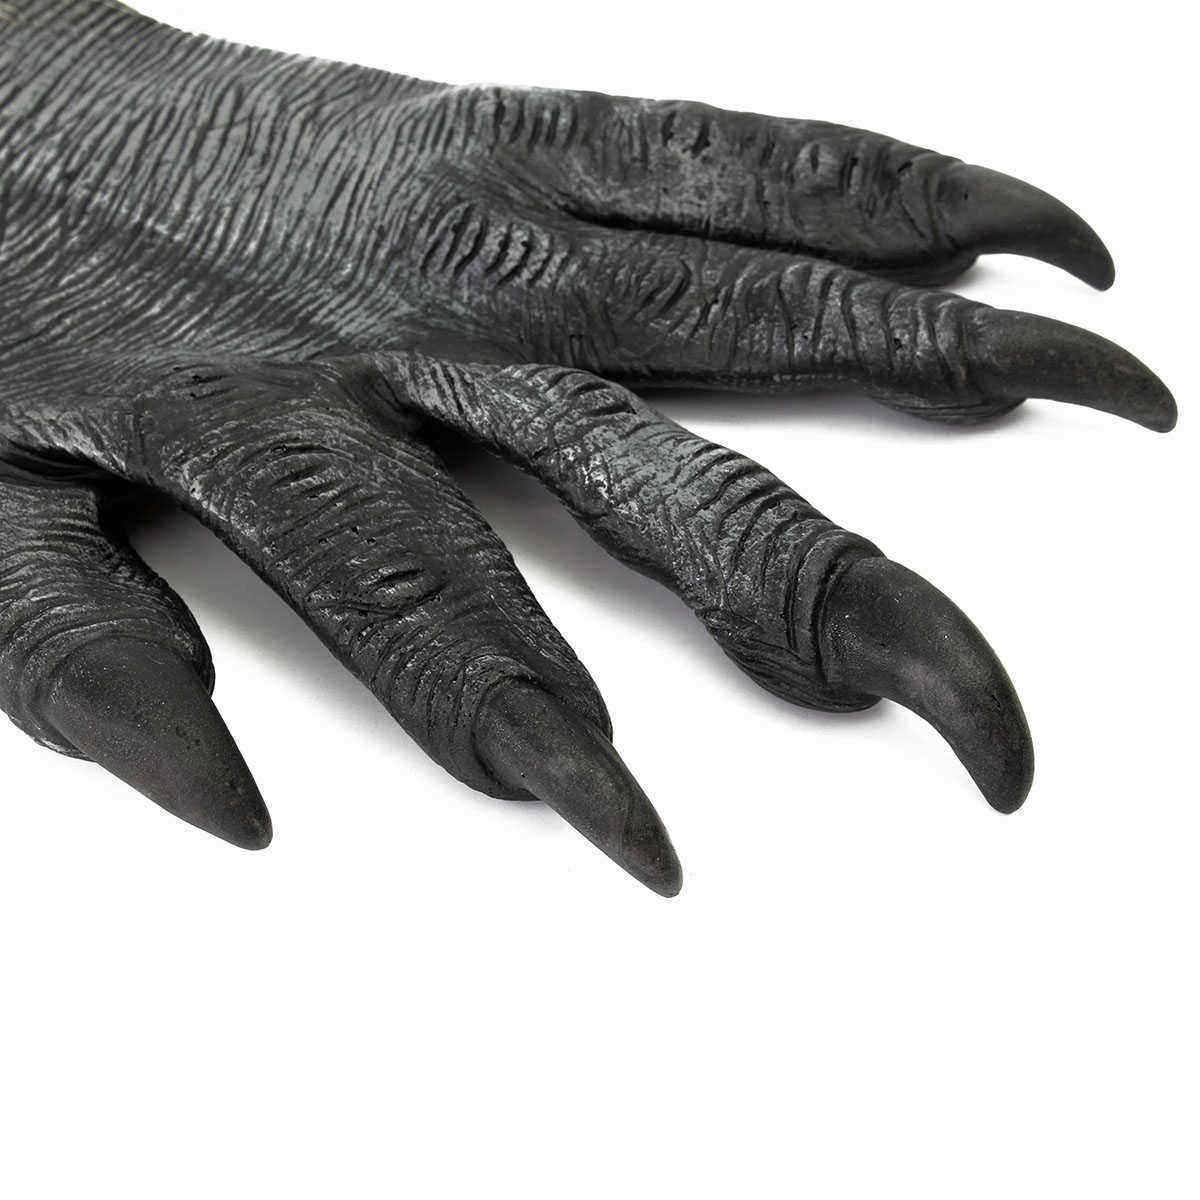 12PCS-Latex-Rubber-Wolf-Head-Hair-Mask-Werewolf-Gloves-Party-Scary-Halloween-Cosplay-1086799